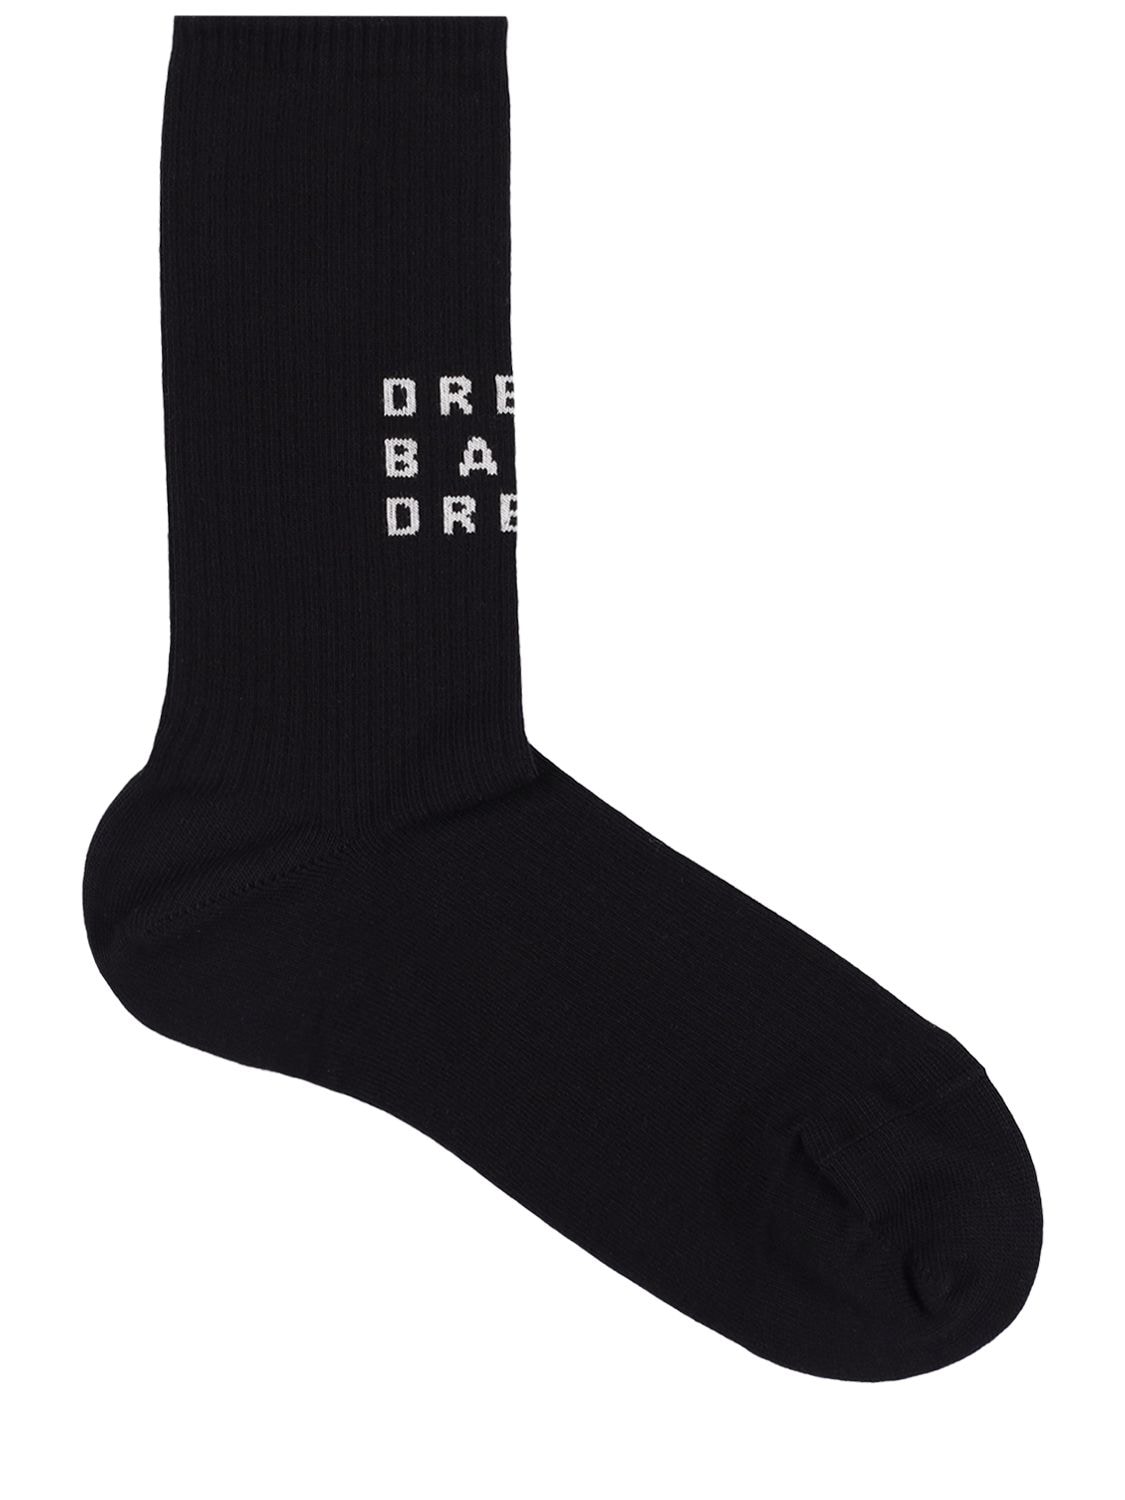 LIBERAL YOUTH MINISTRY BLEACHED COTTON BLEND KNIT SOCKS